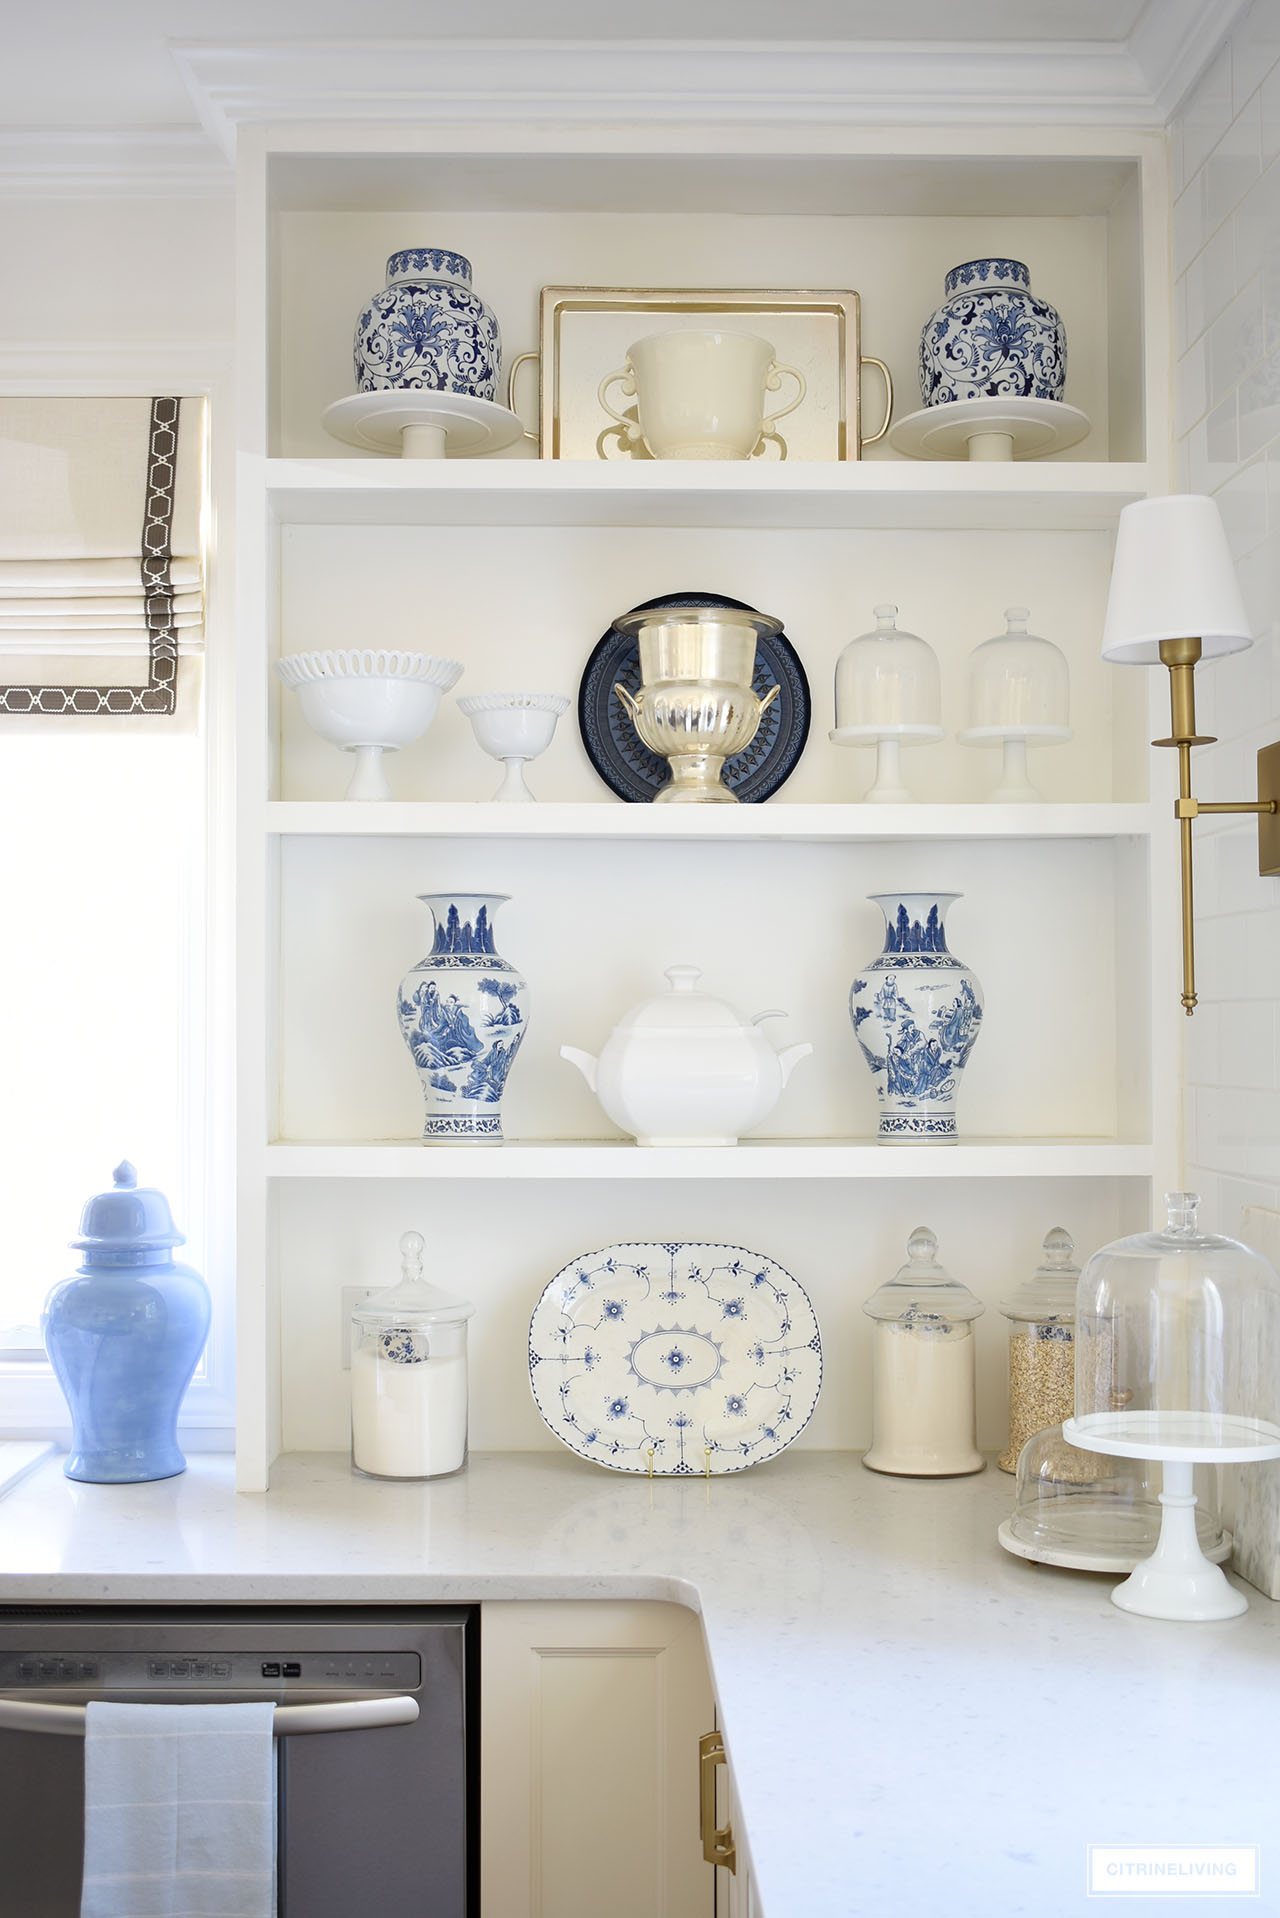 Open kitchen shelves decorated for spring with beautiful blue and white accents.